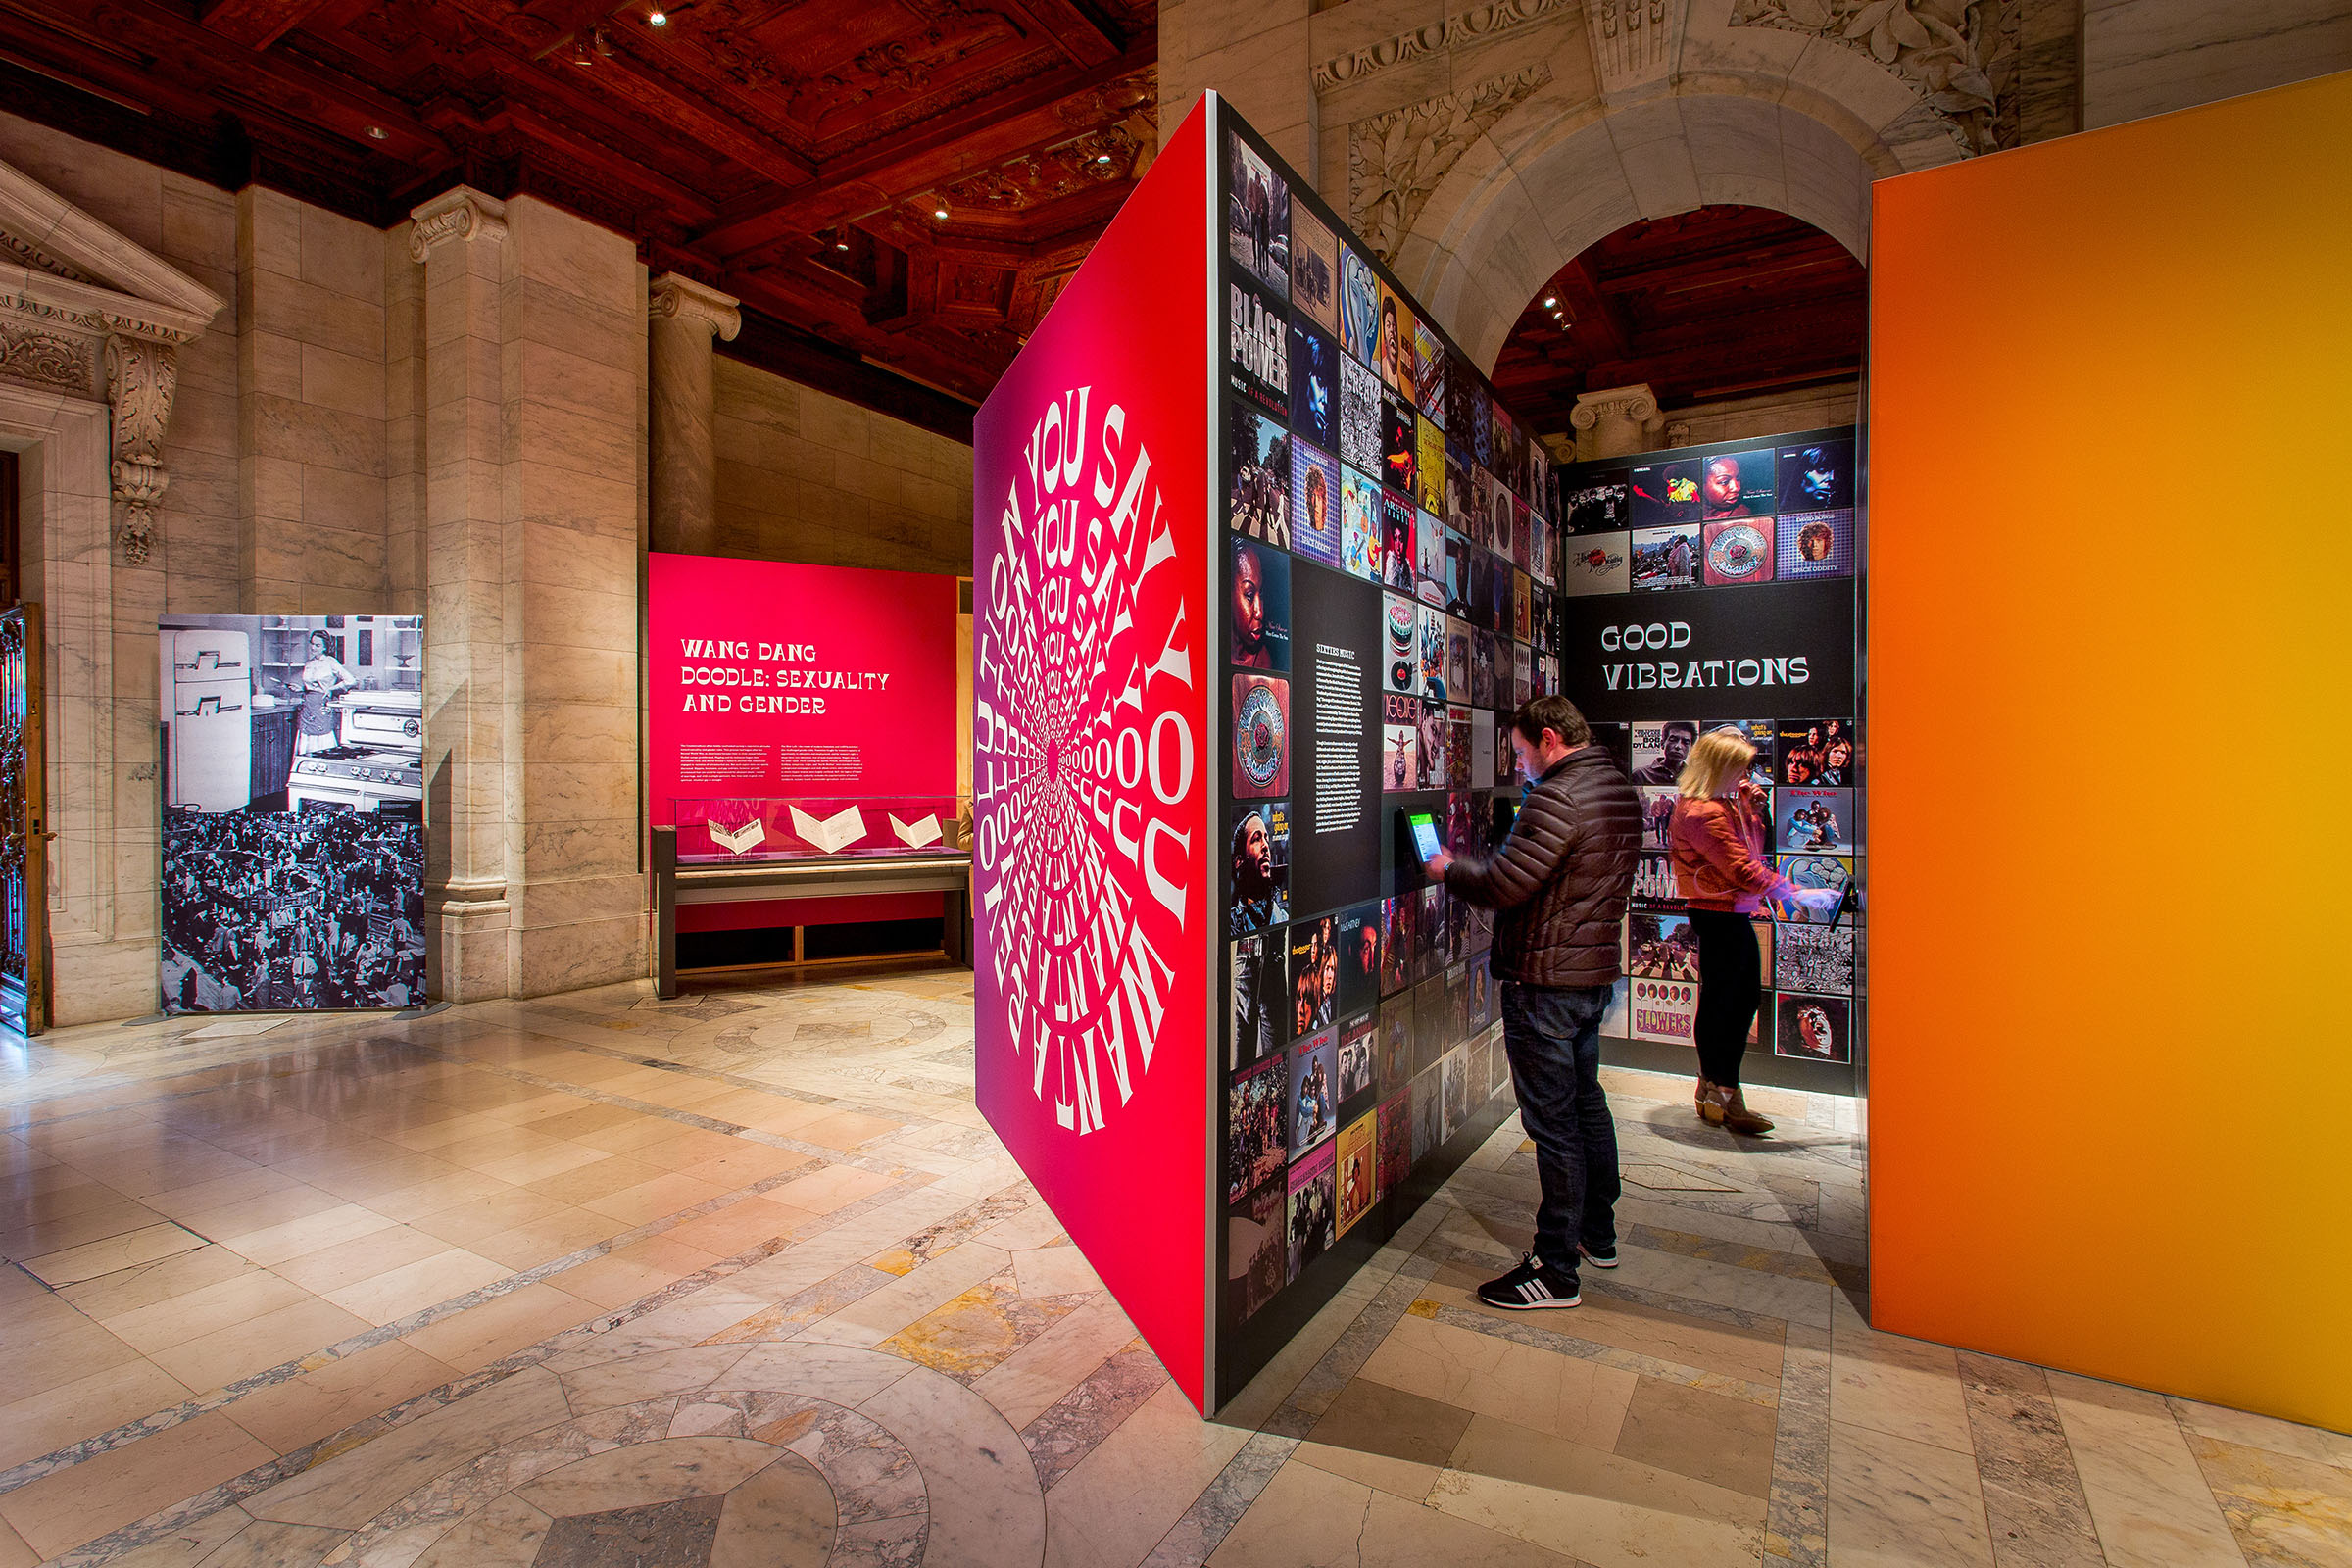 You Say You Want A Revolution - In “music niches” embedded behind title and intro walls, visitors could select period music according to the sections in the exhibition, surrounded by album covers. (